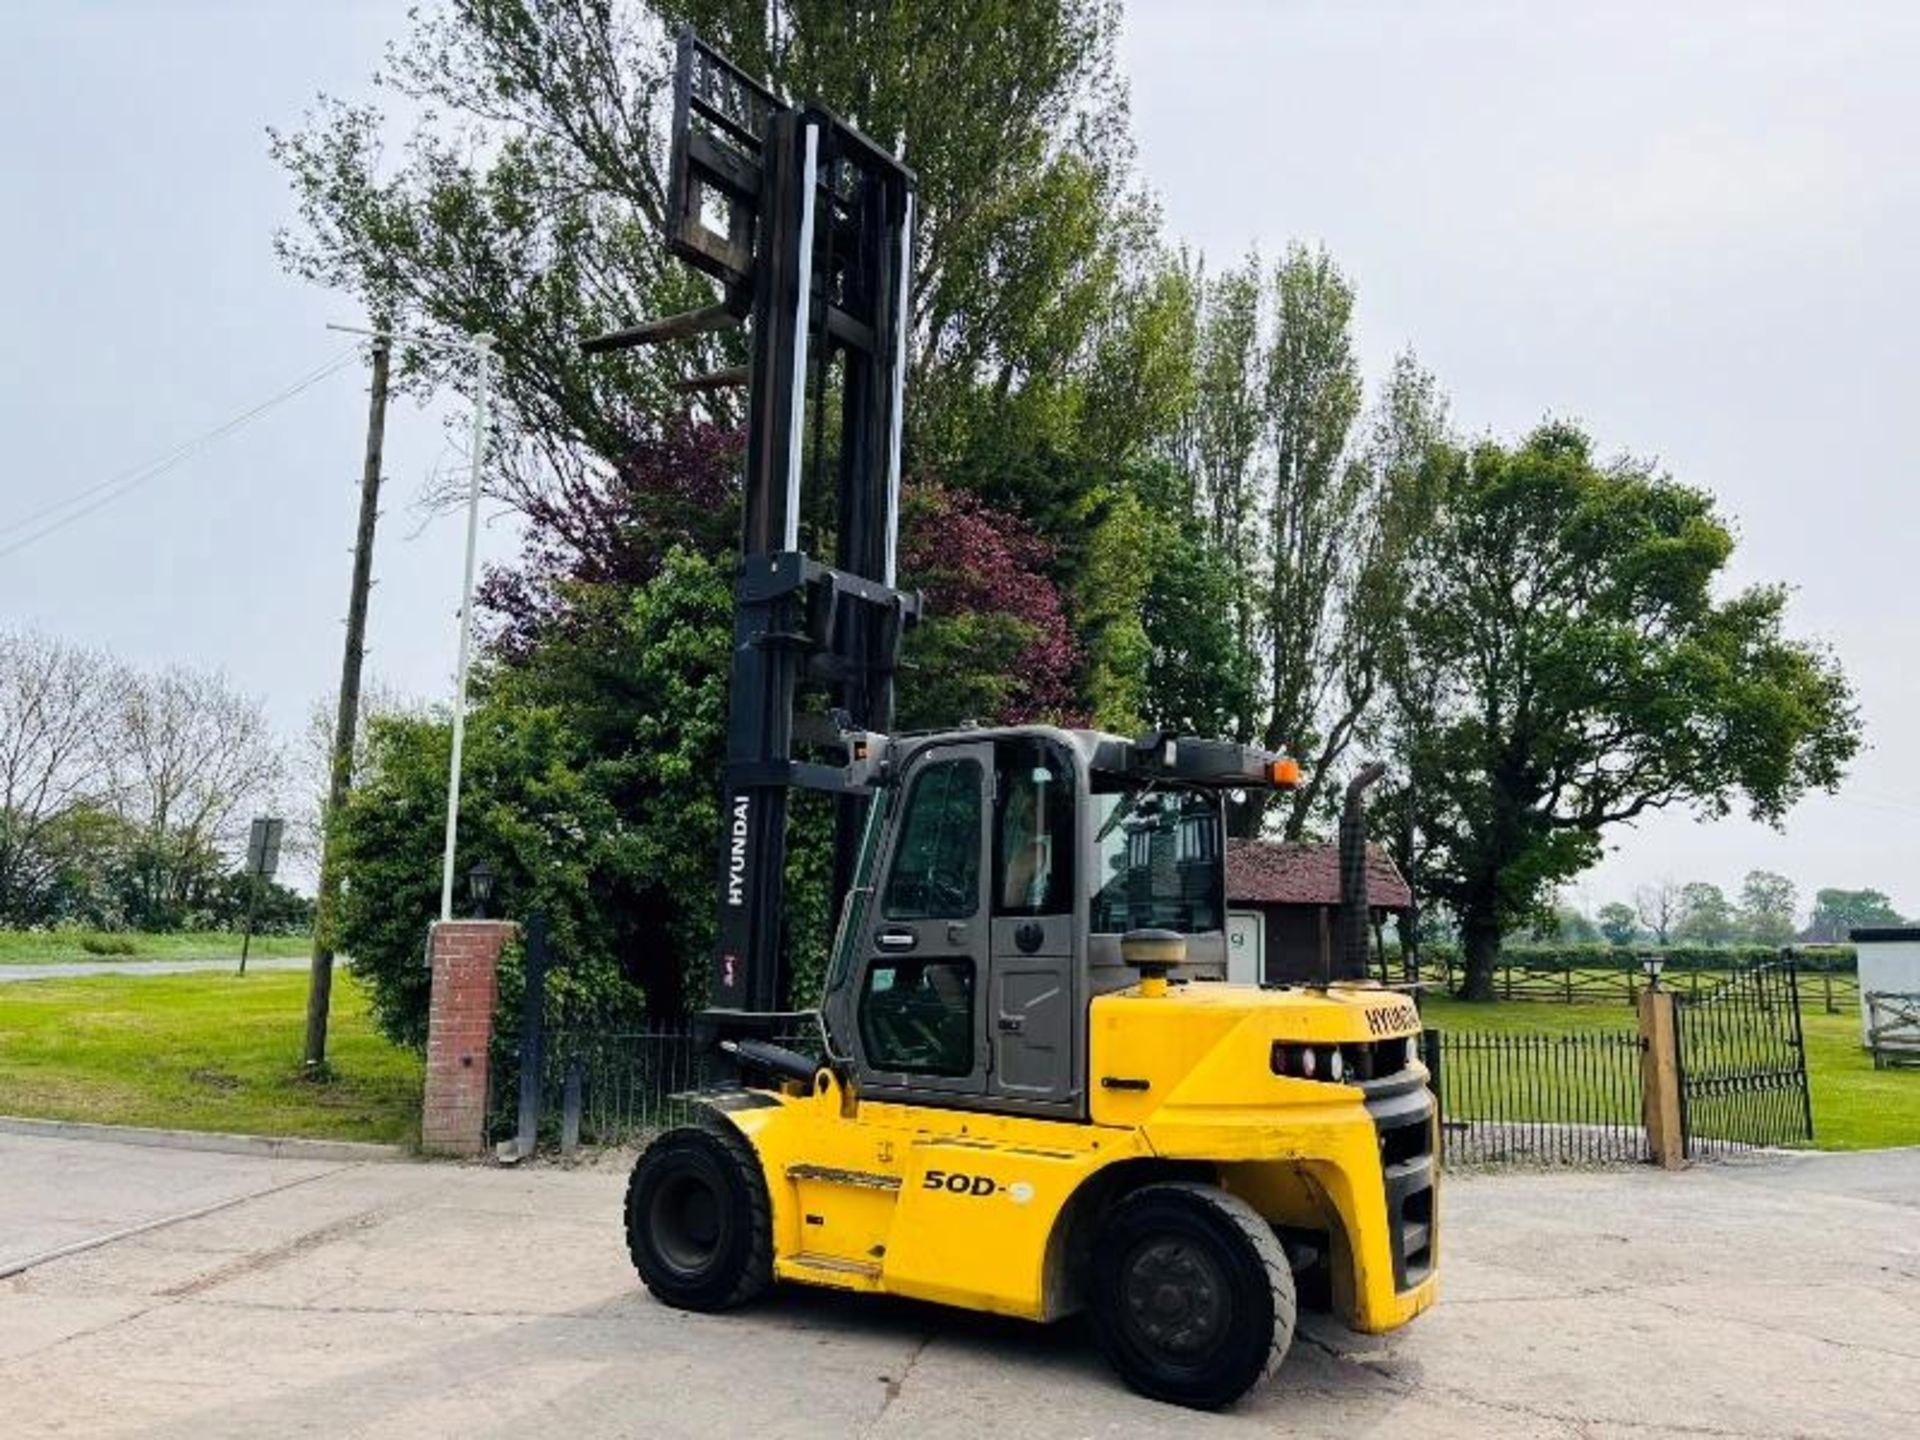 HYUNDAI 50D-9 DIESEL FORKLIFT *YEAR 2016, 5 TON LIFT* C/W SIDE SHIFT - Image 9 of 18